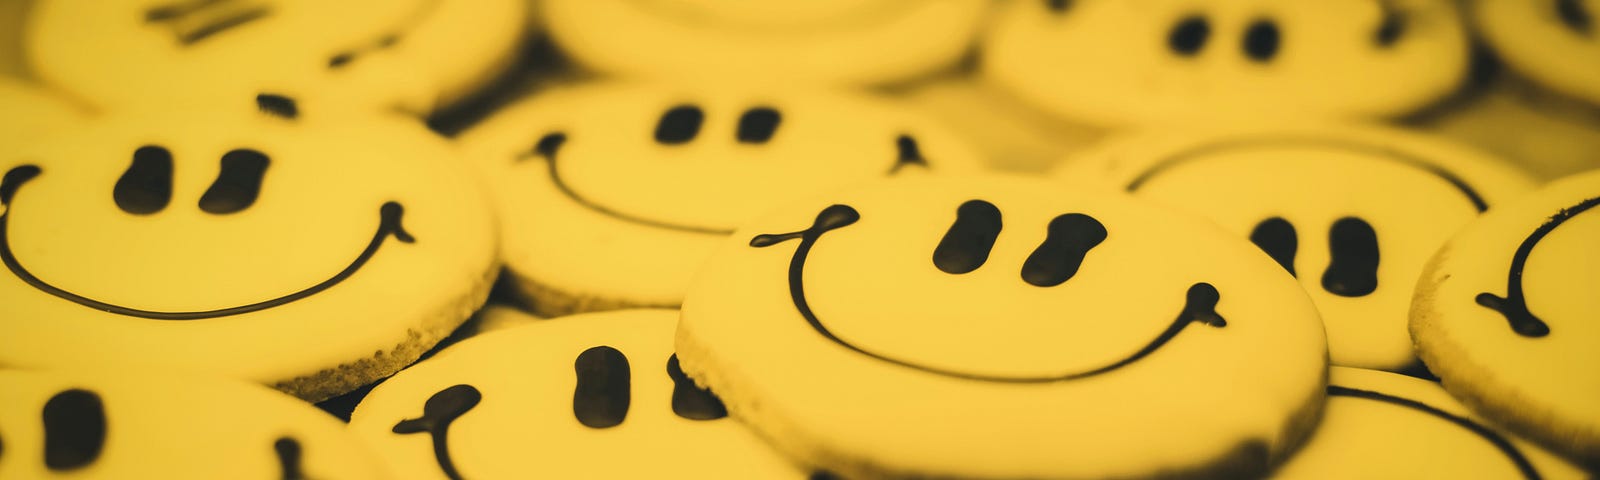 Smiley face cookies